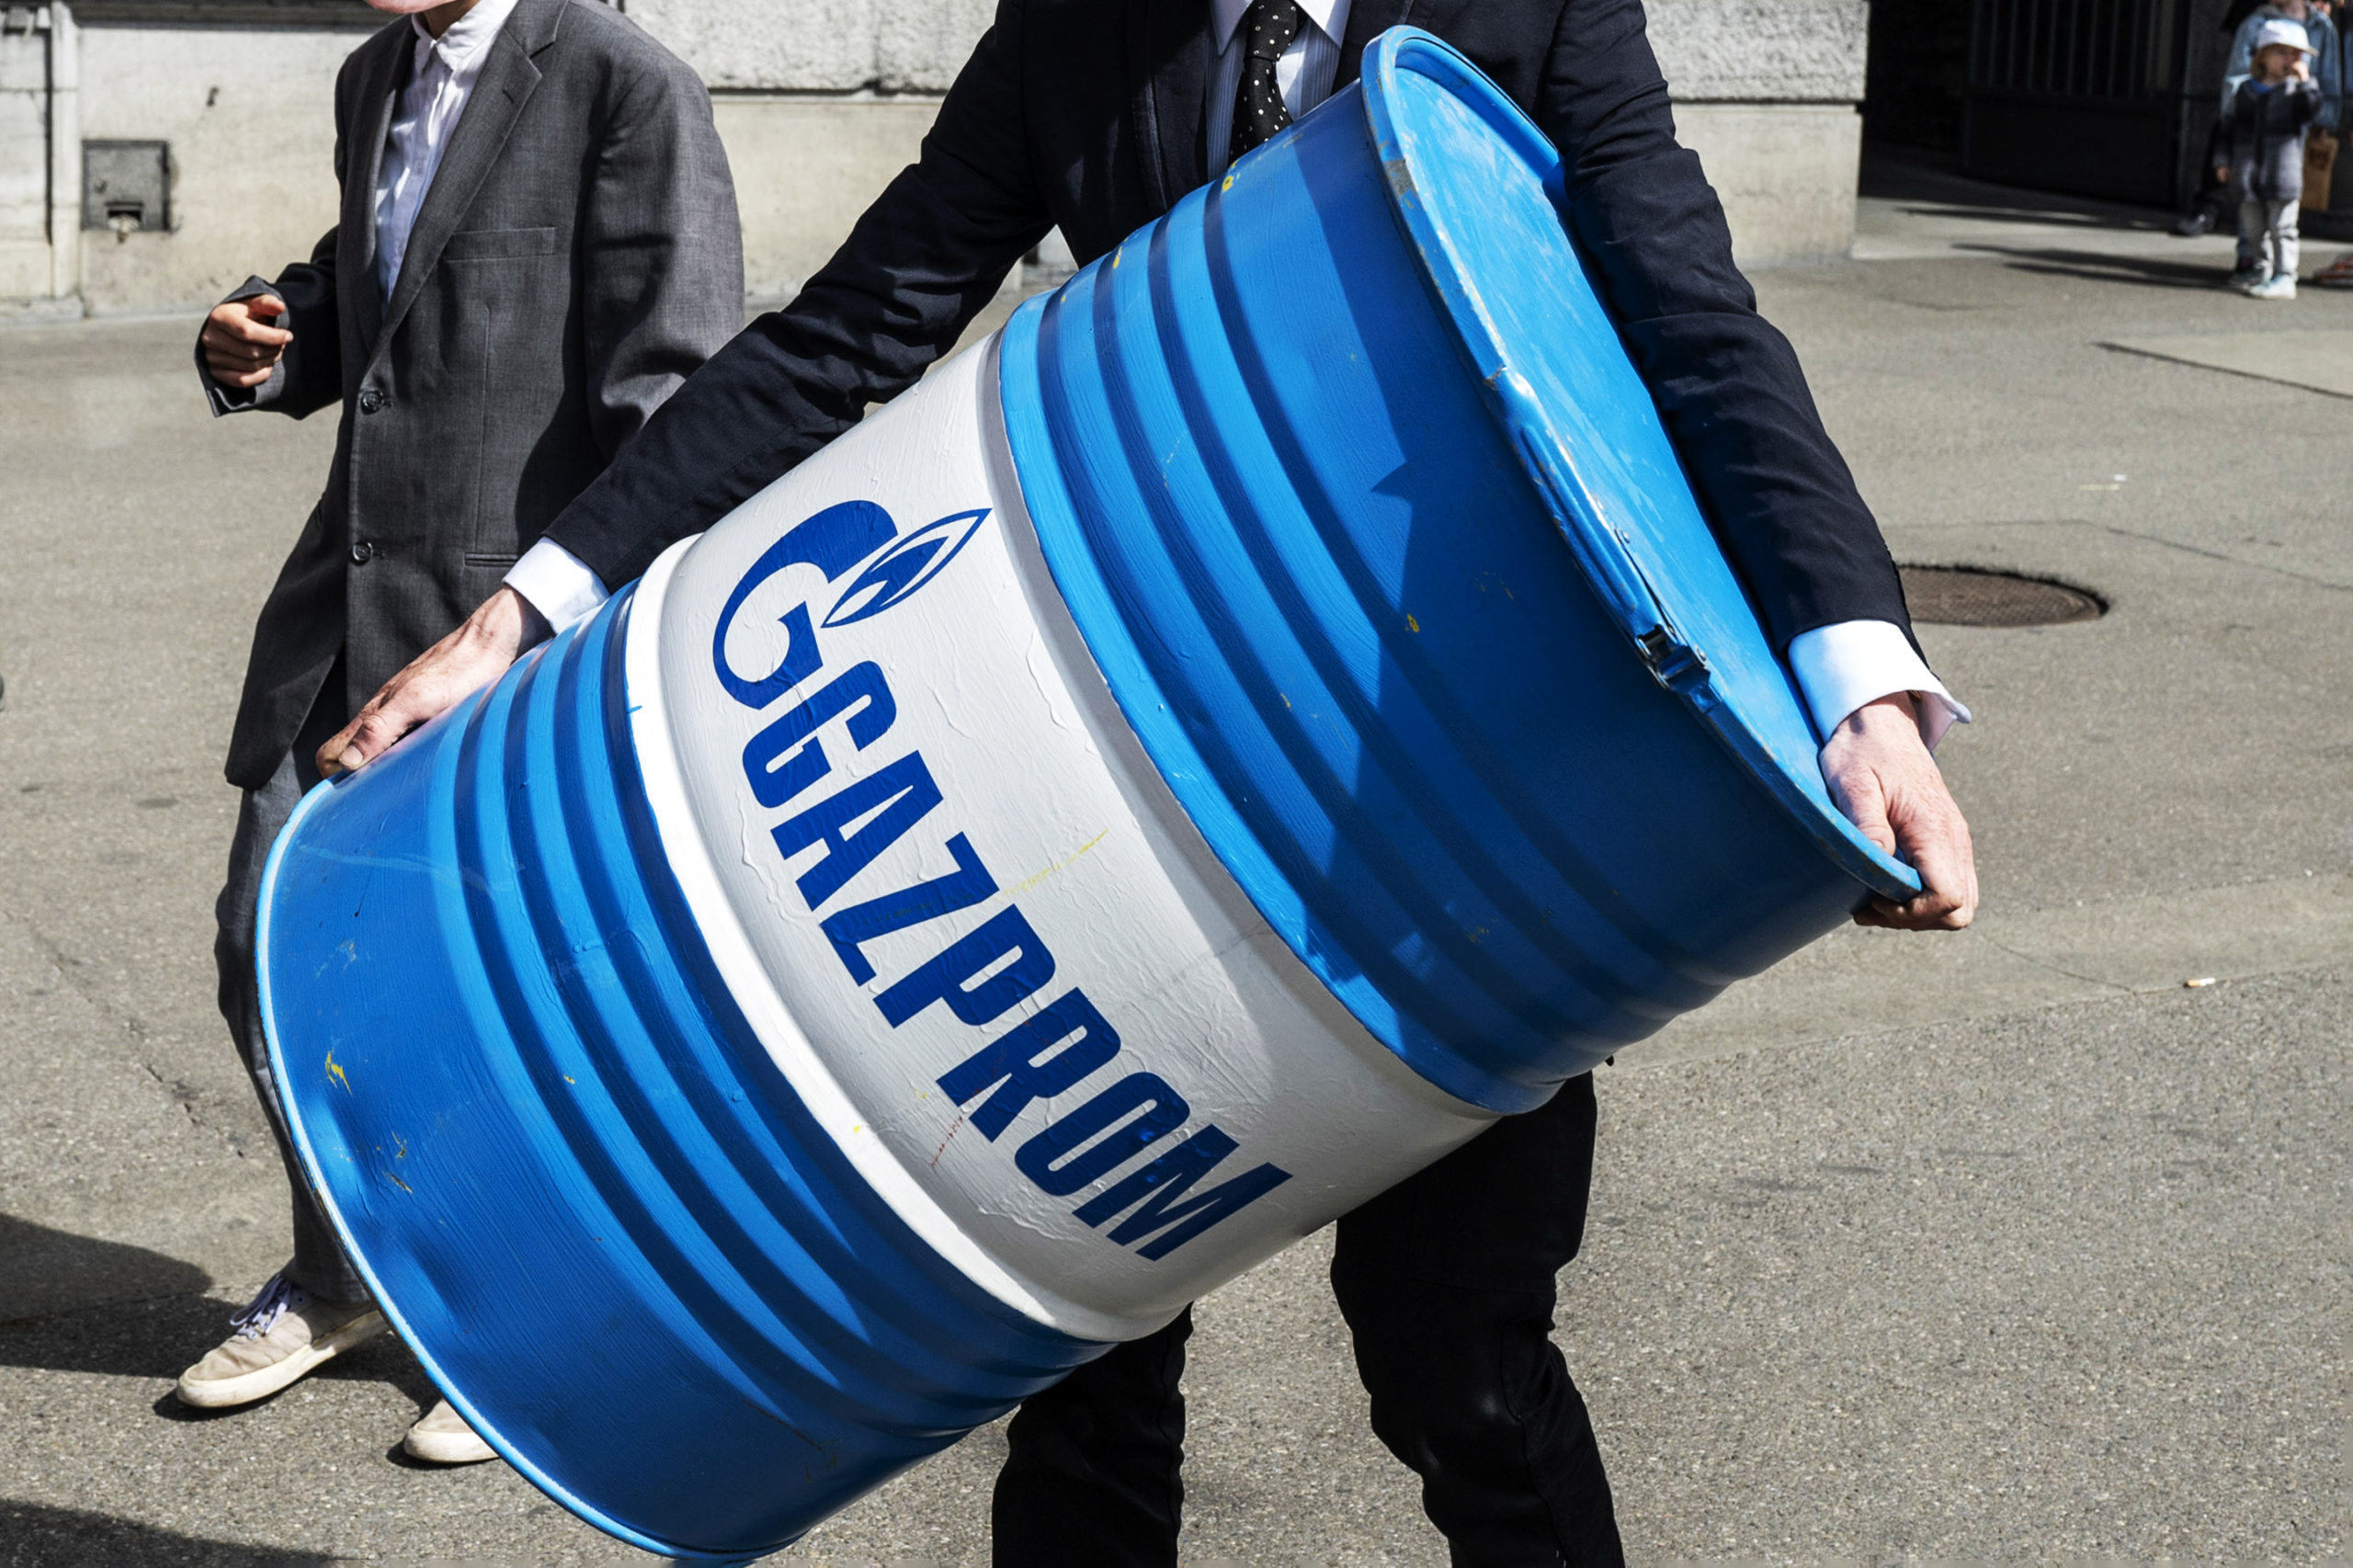 Another Russian business executive with ties to Gazprom has been found dead